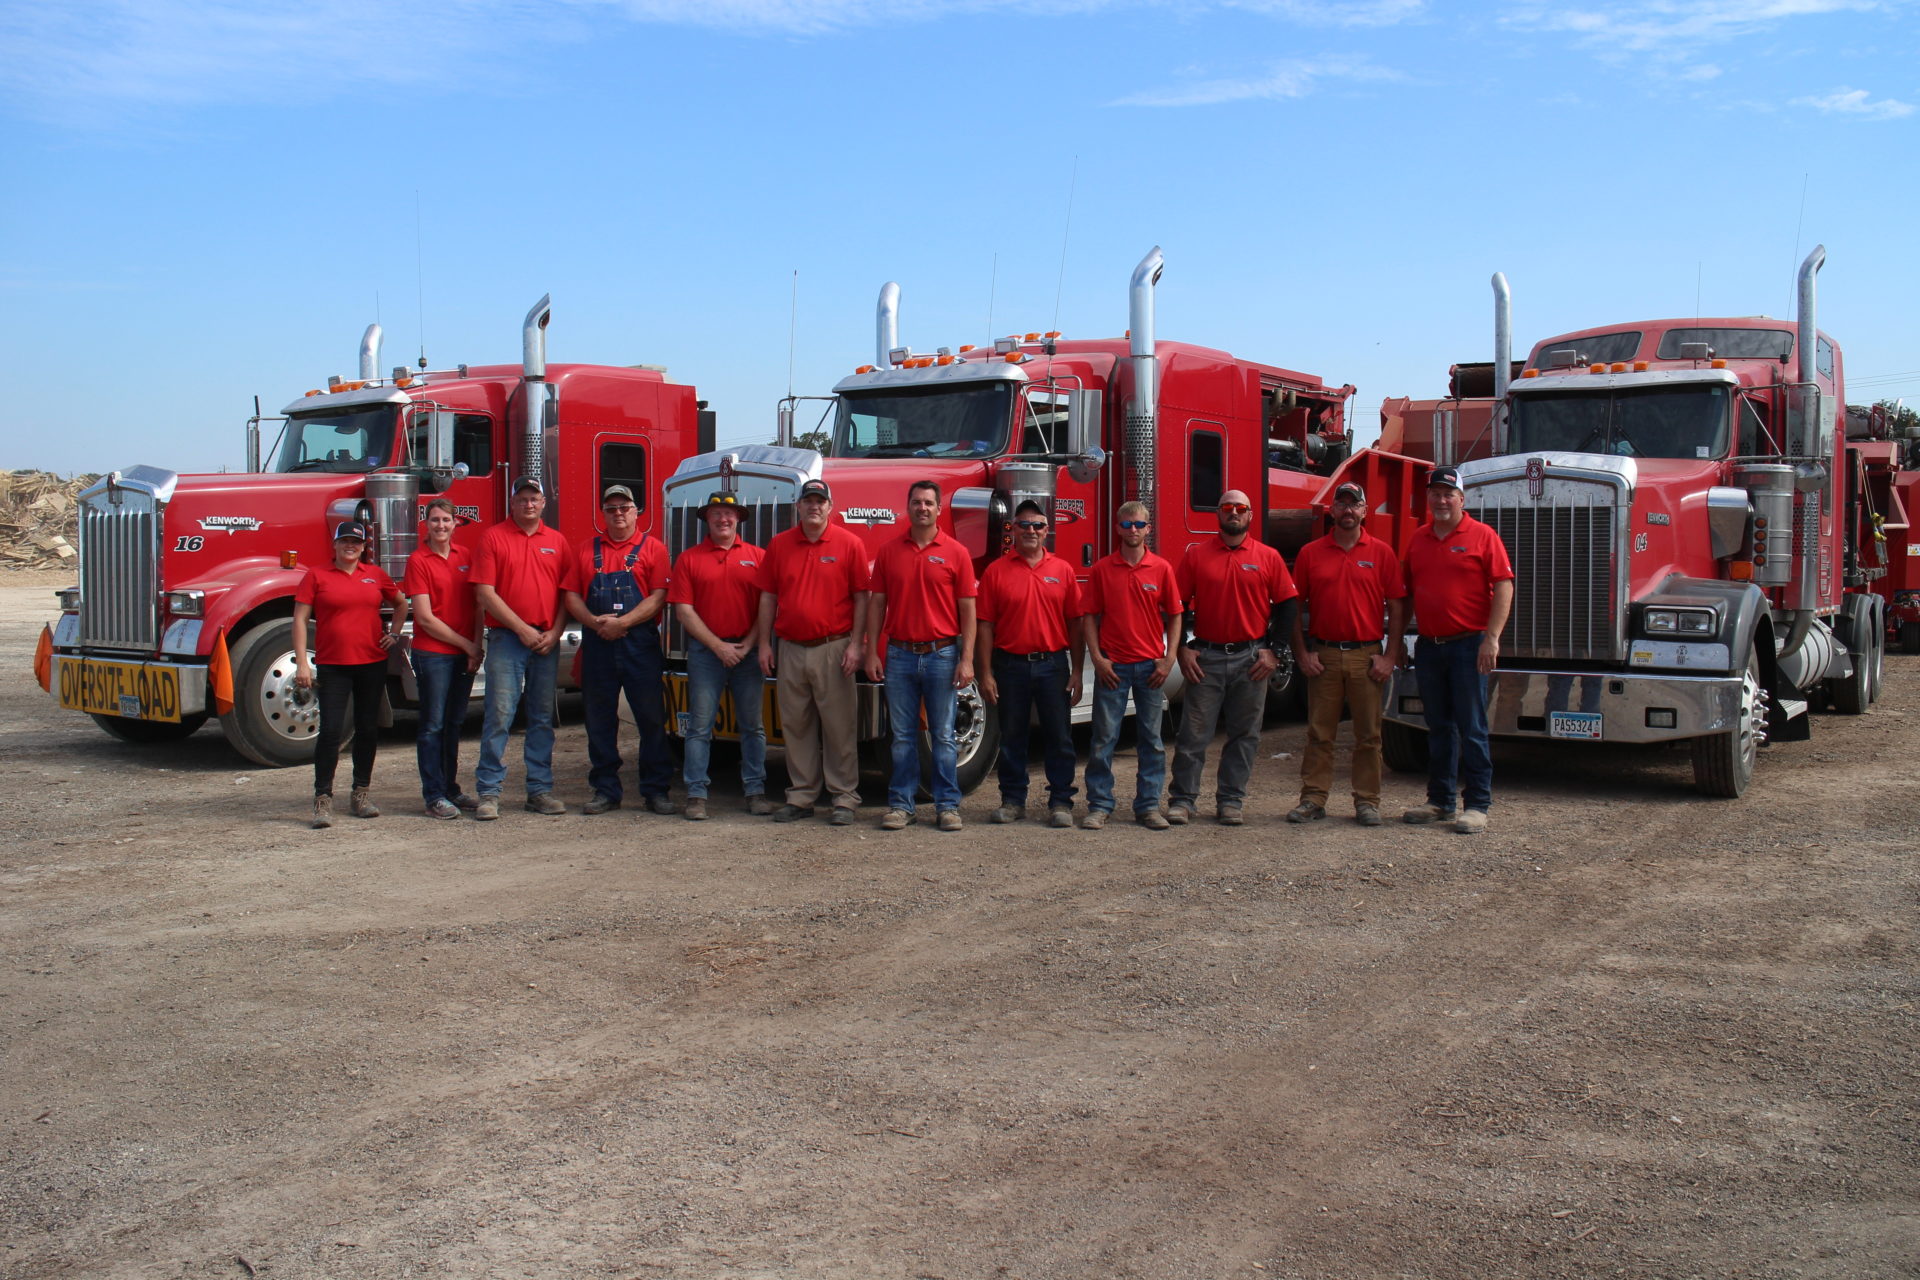 Group of Rotochopper employees pose for a photo together in front of three semi trucks outdoors.